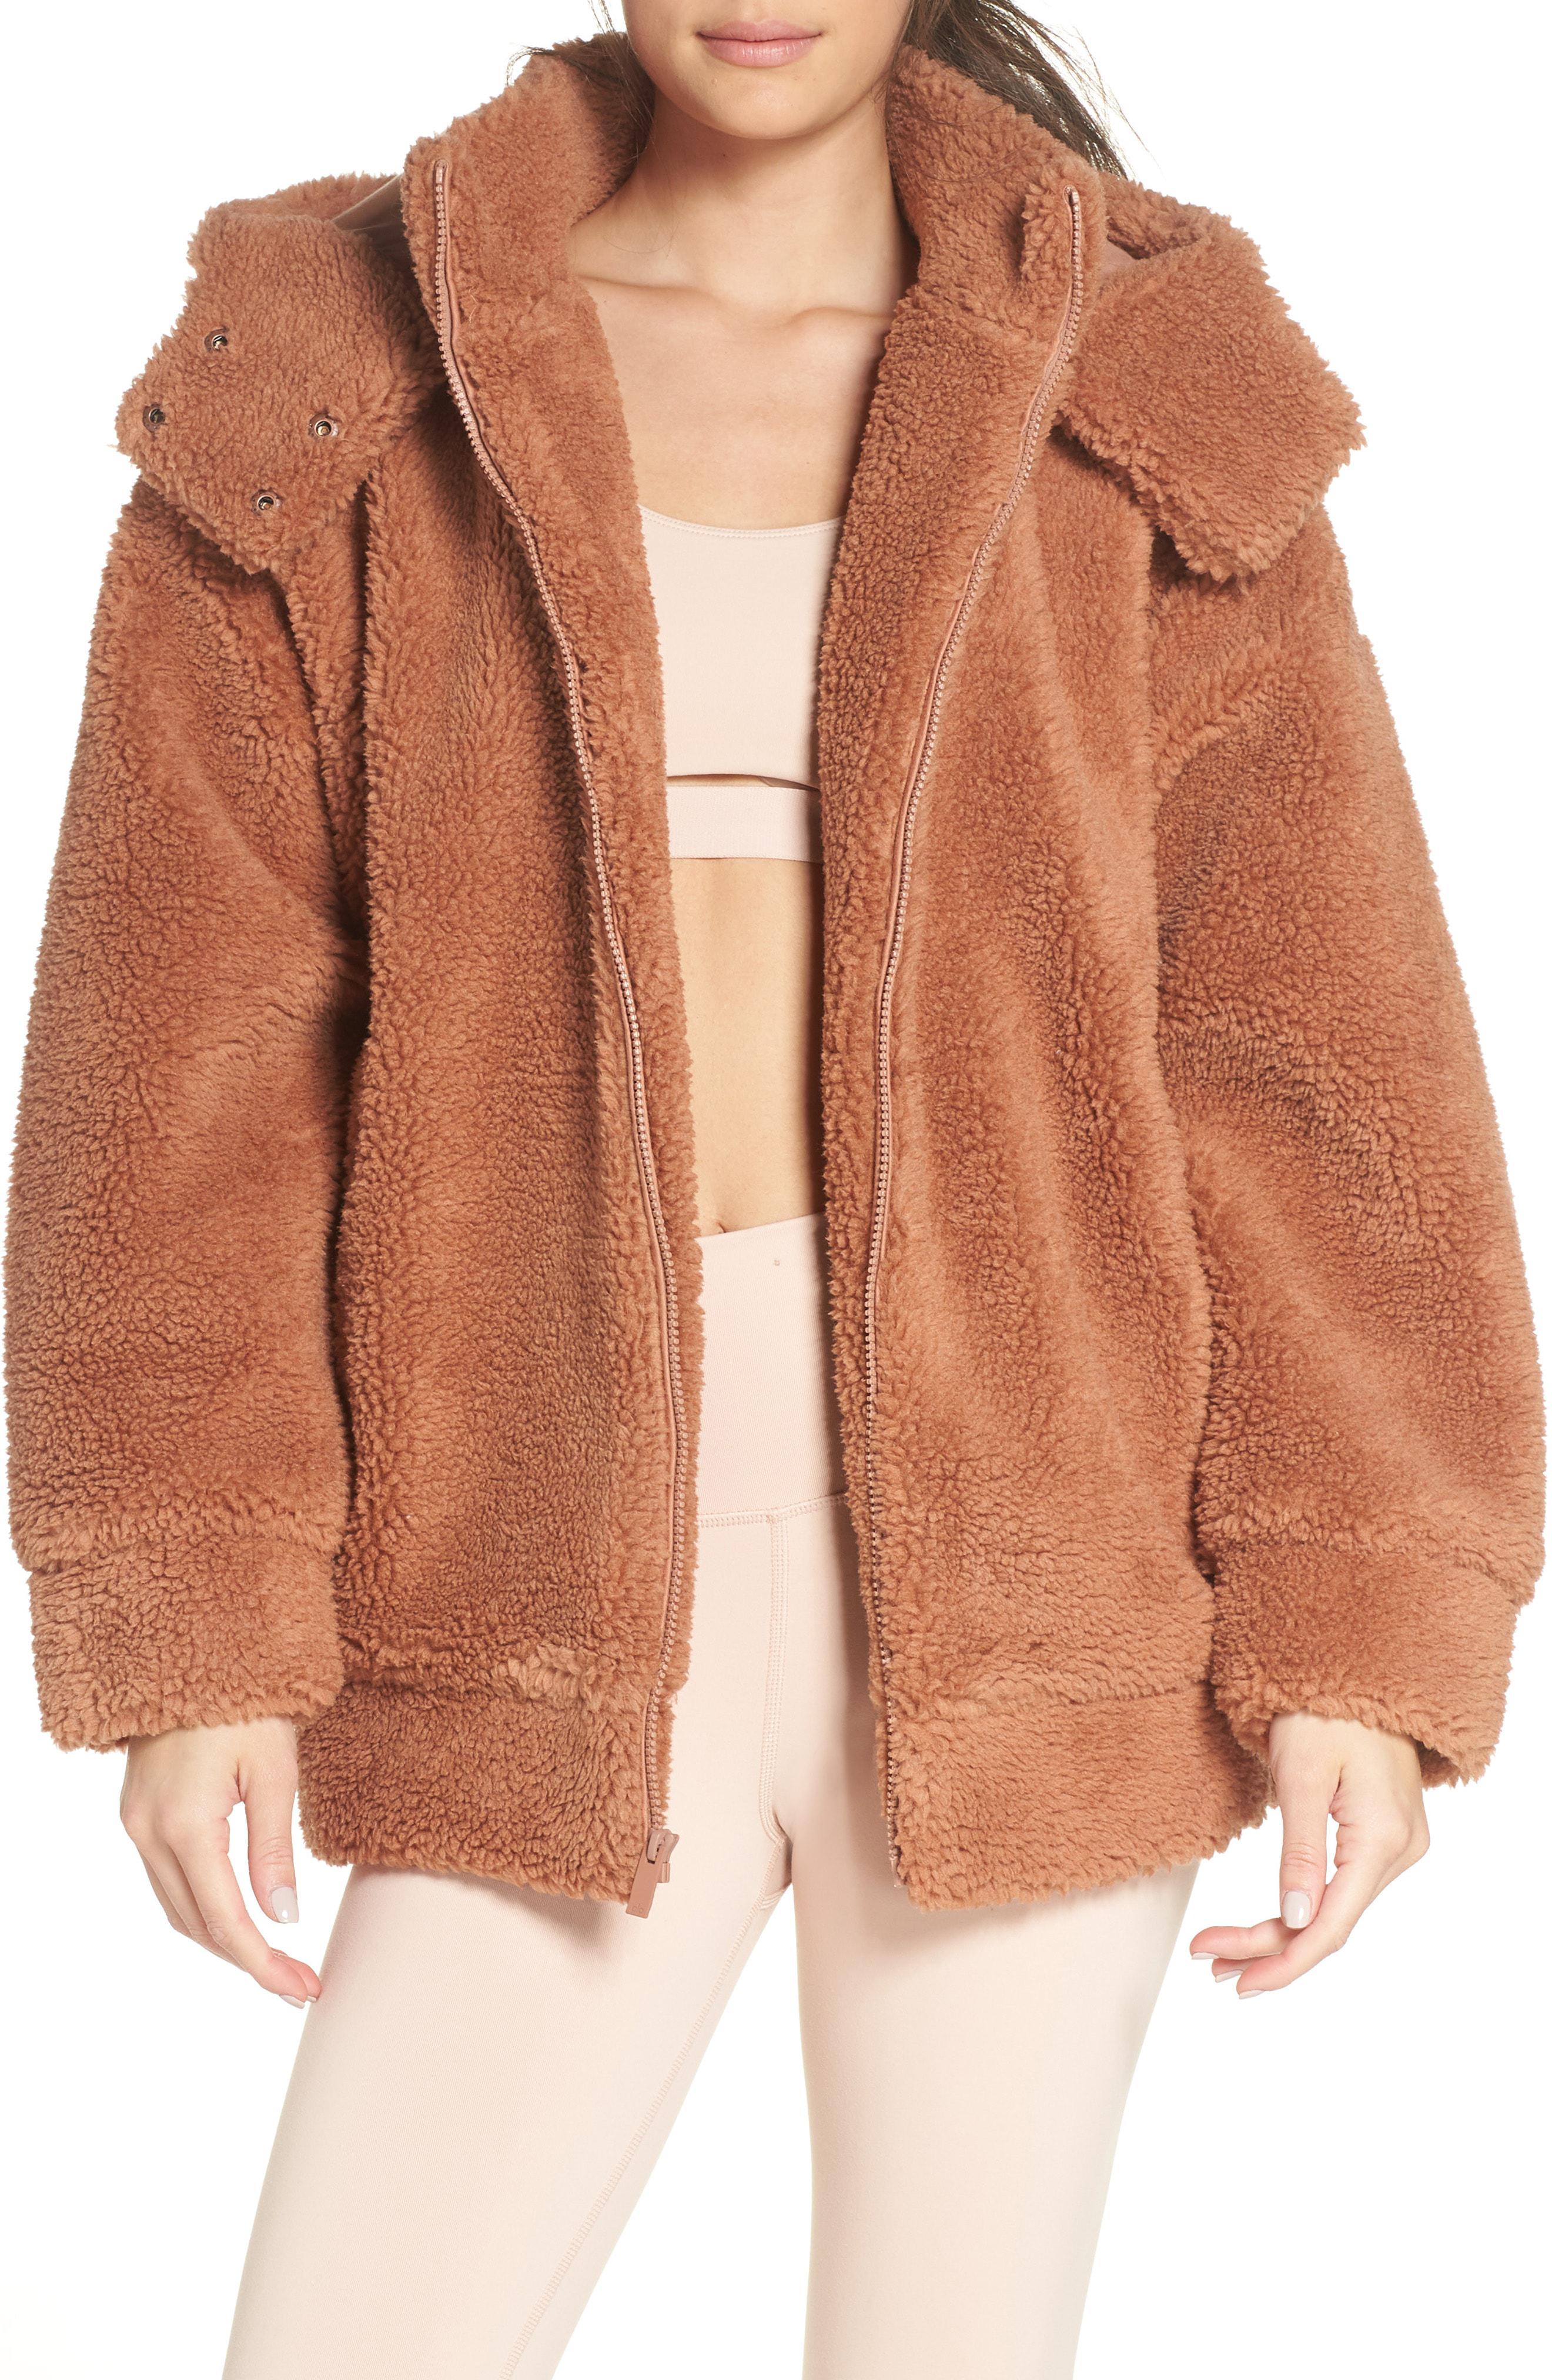 Lyst - Alo Yoga Norte Faux Fur Coat in Natural - Save 30.0%